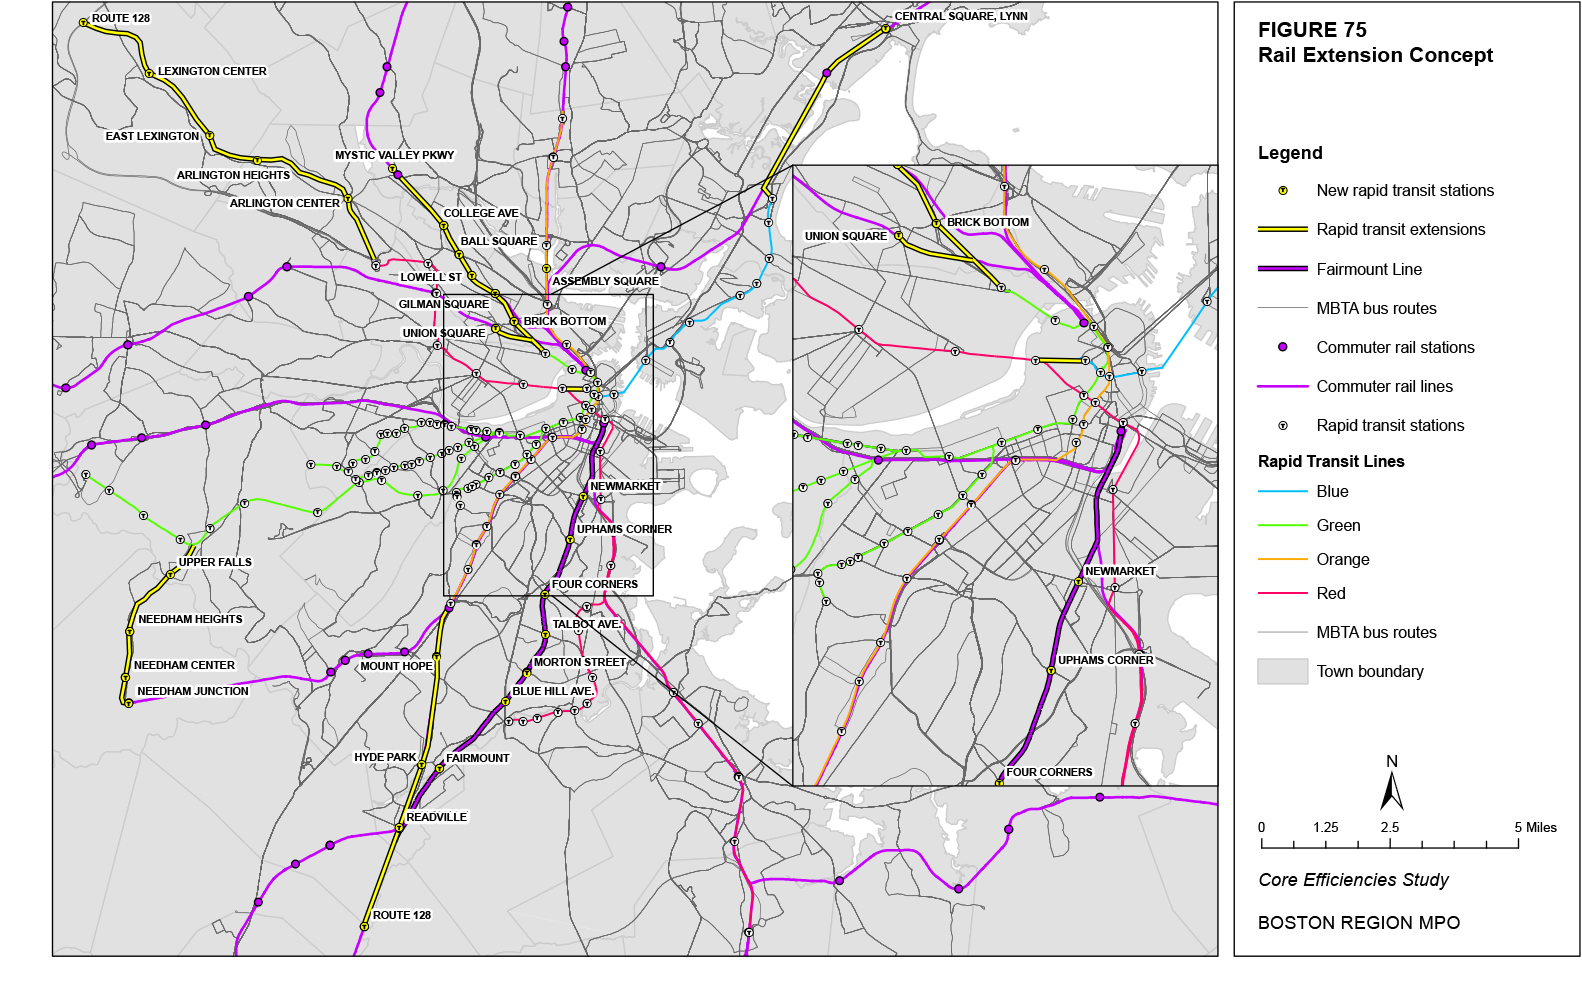 This map shows the MBTA bus, rapid transit, and commuter rail network with the proposed changes in the rail extension concept